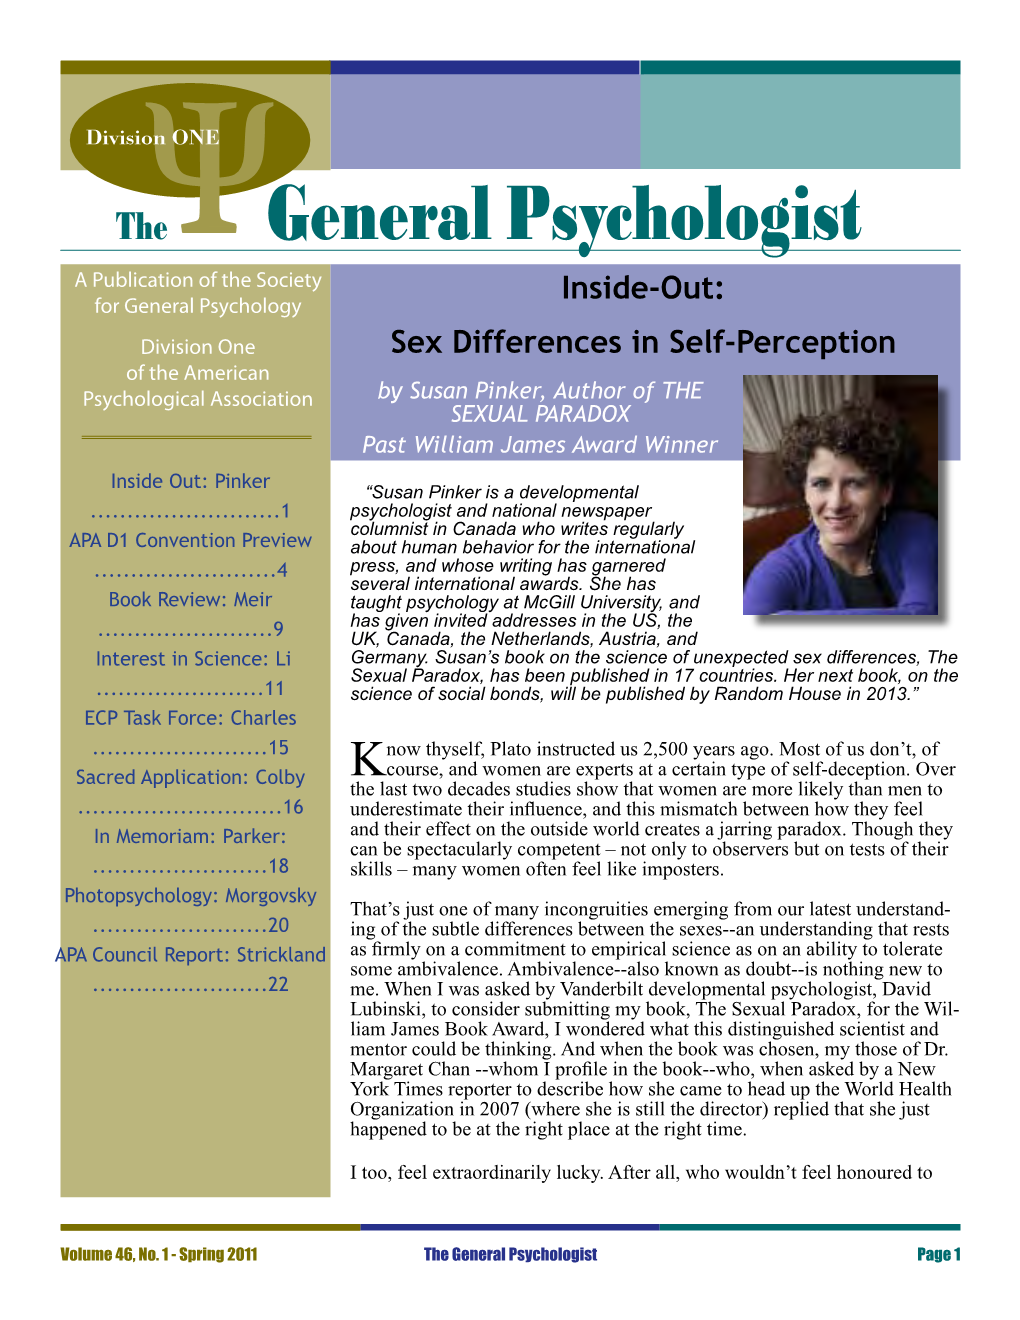 Sex Differences in Self-Perception